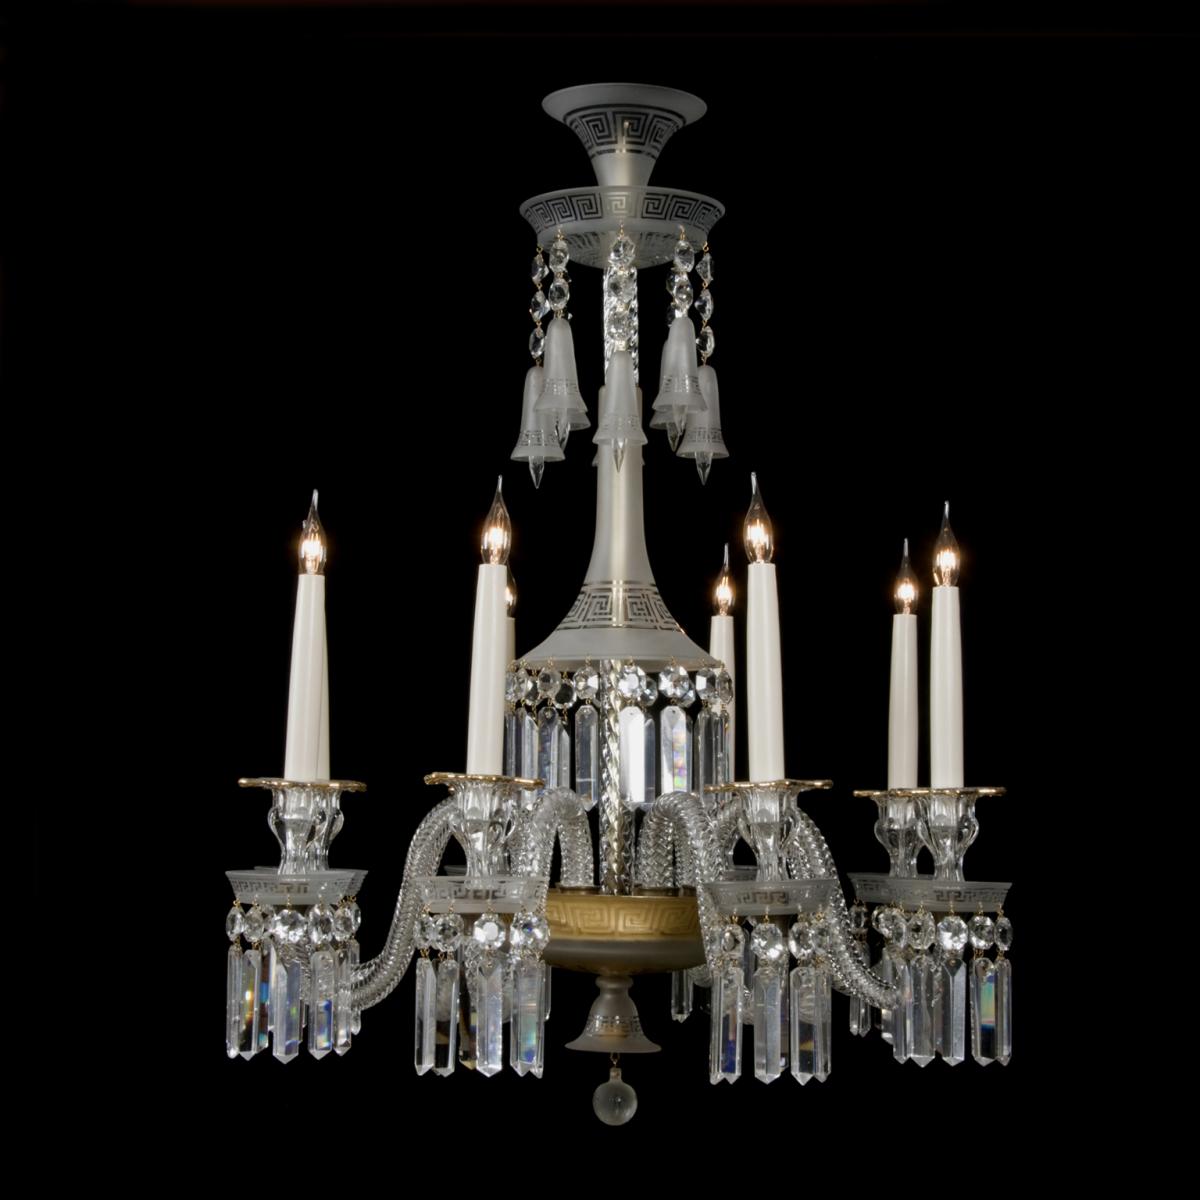 A Neoclassical Chandelier by Baccarat